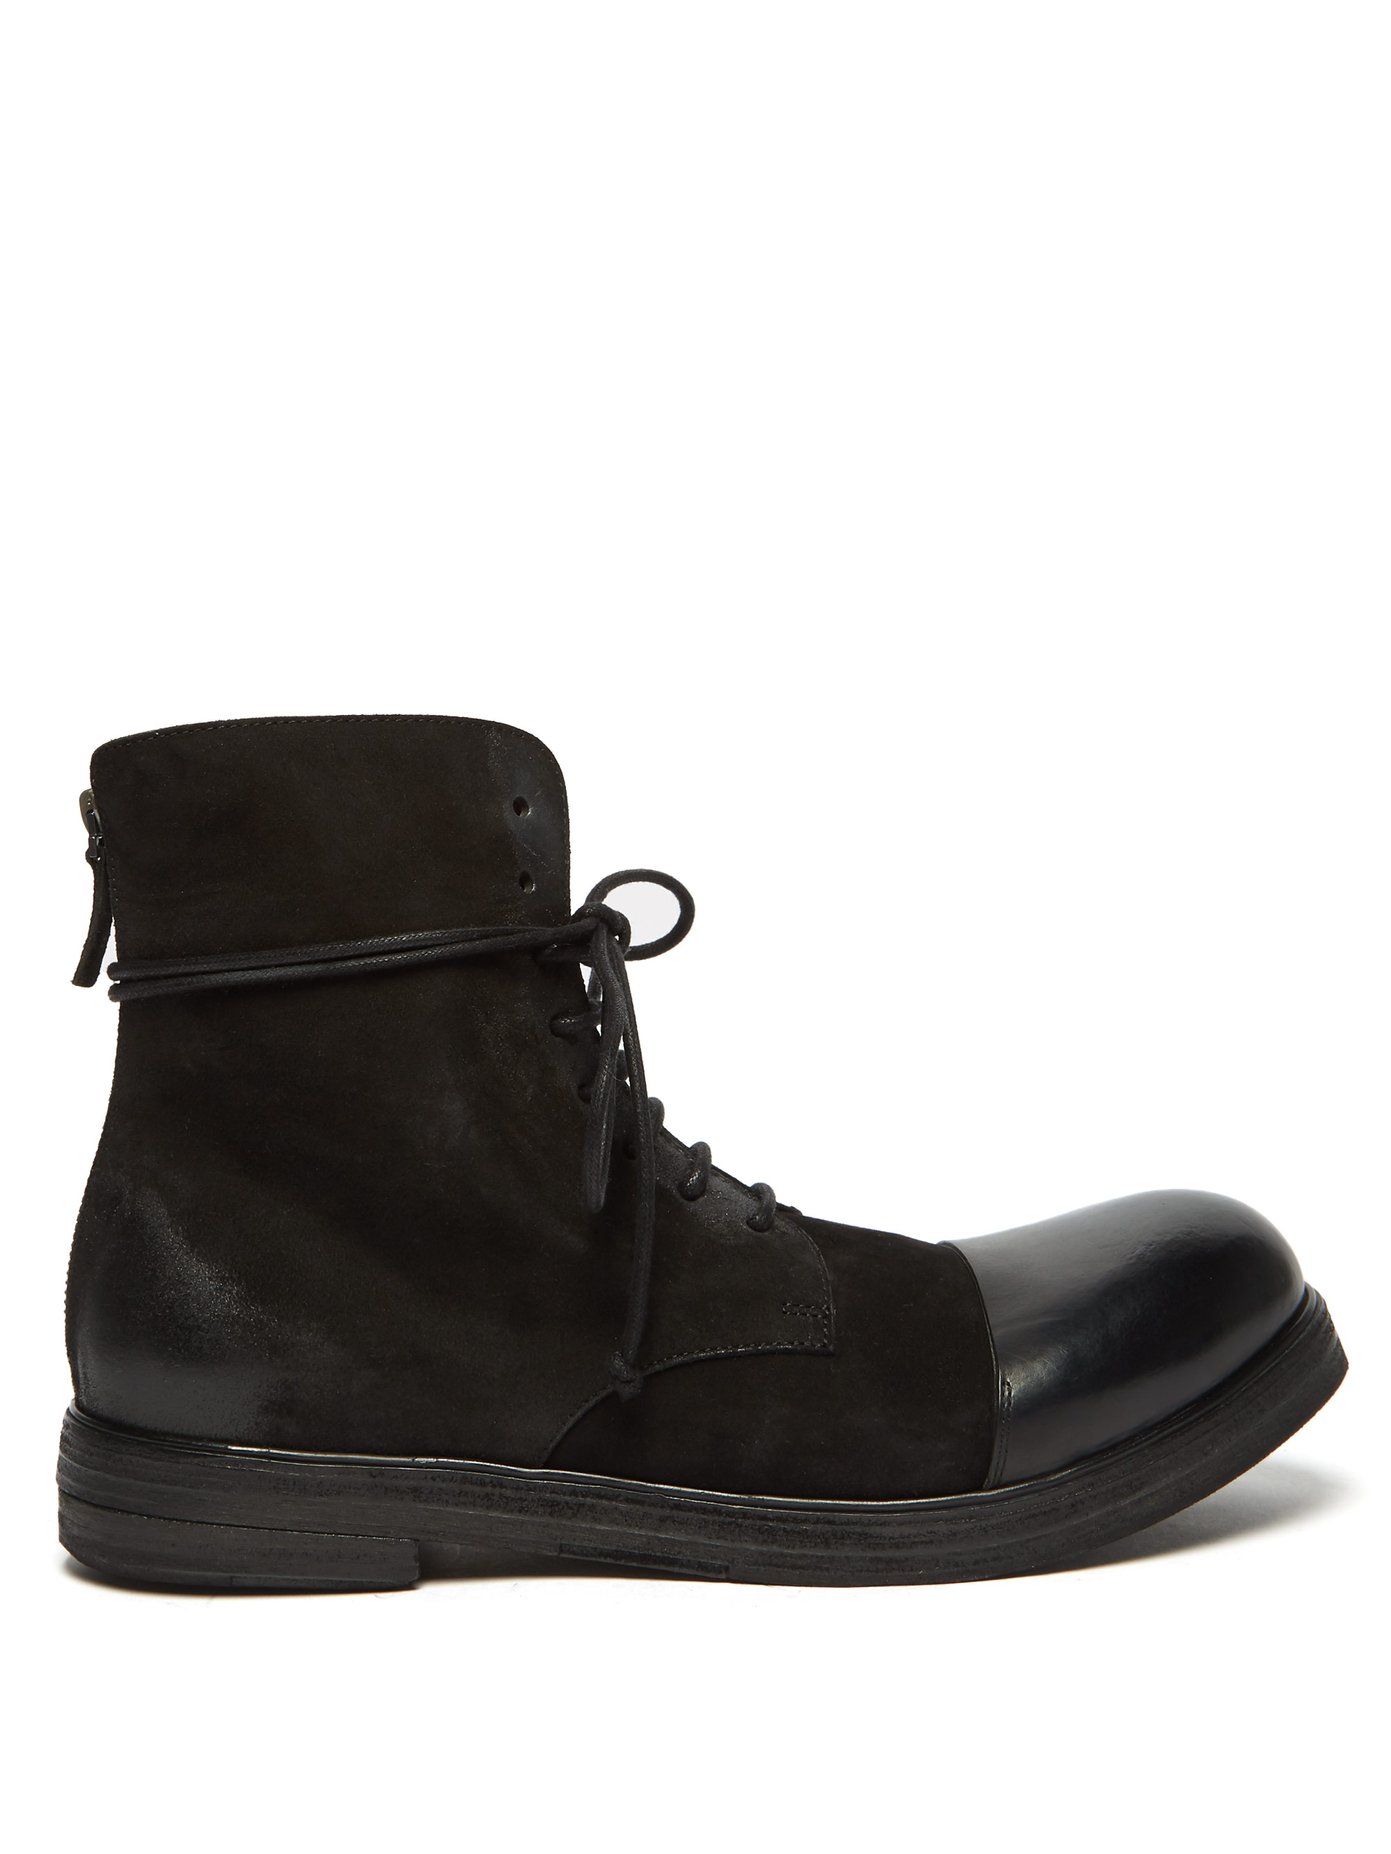 lace up boots fall 219